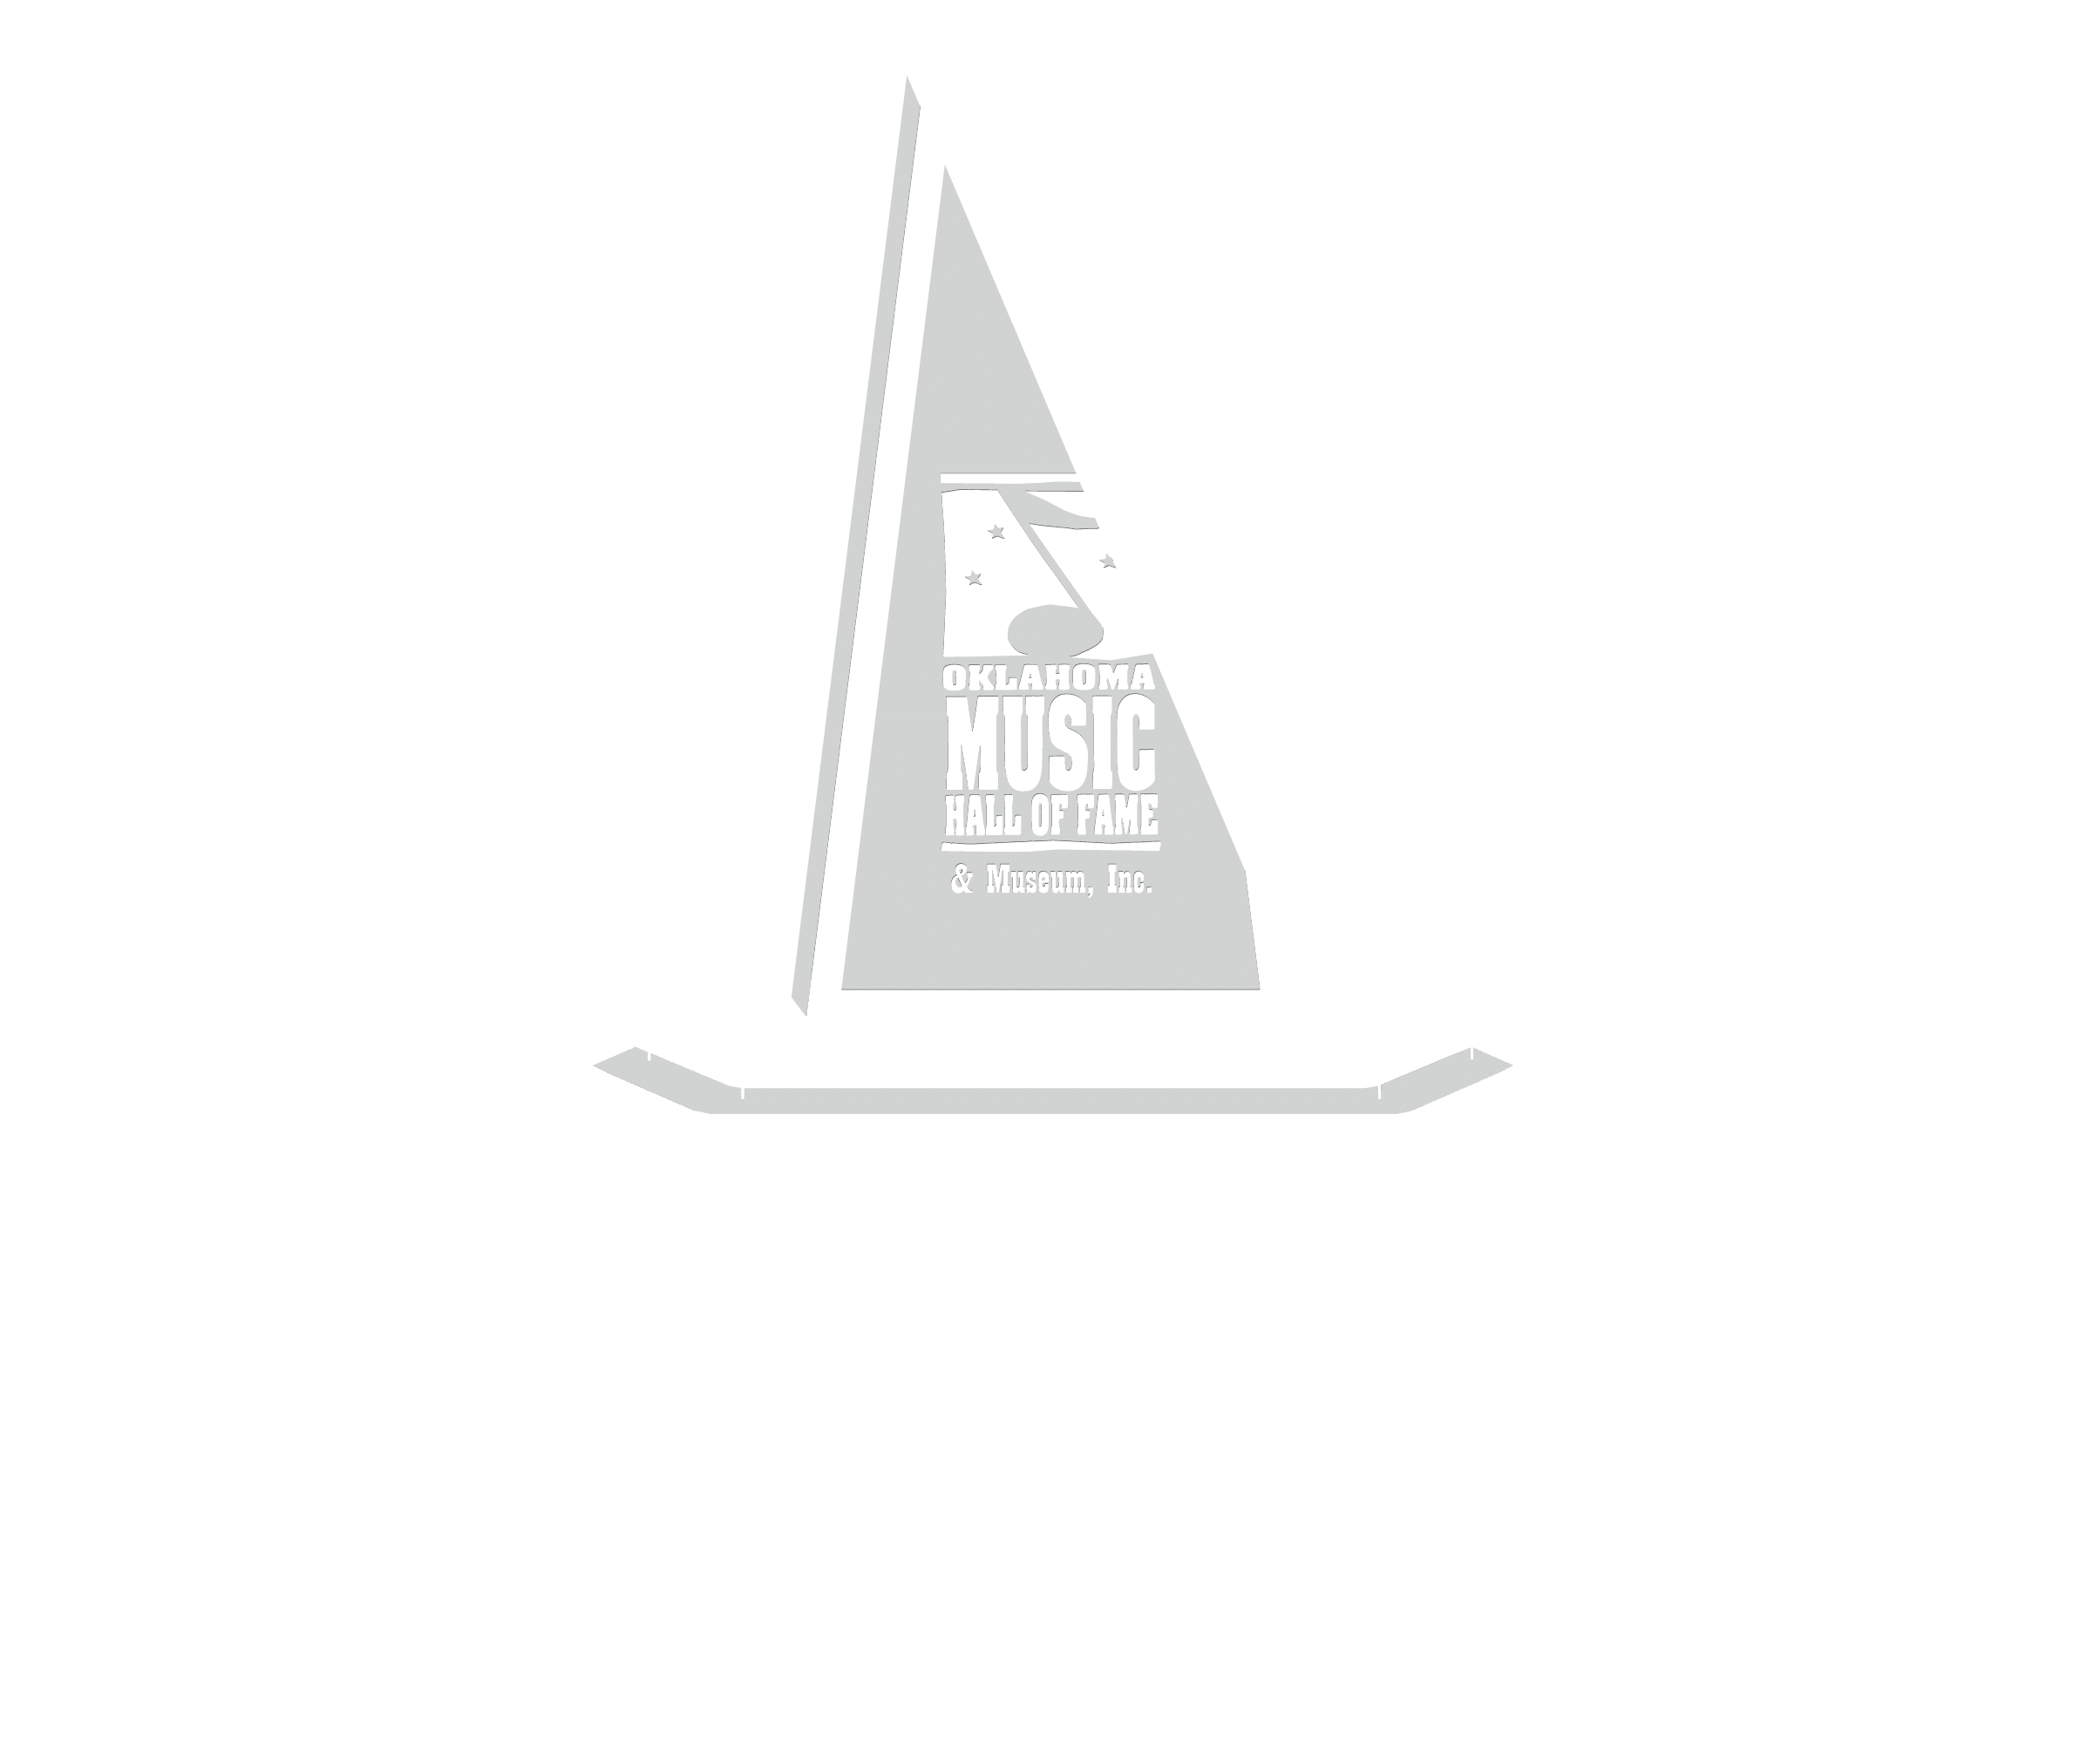 A Black And White Image Of A Music Award